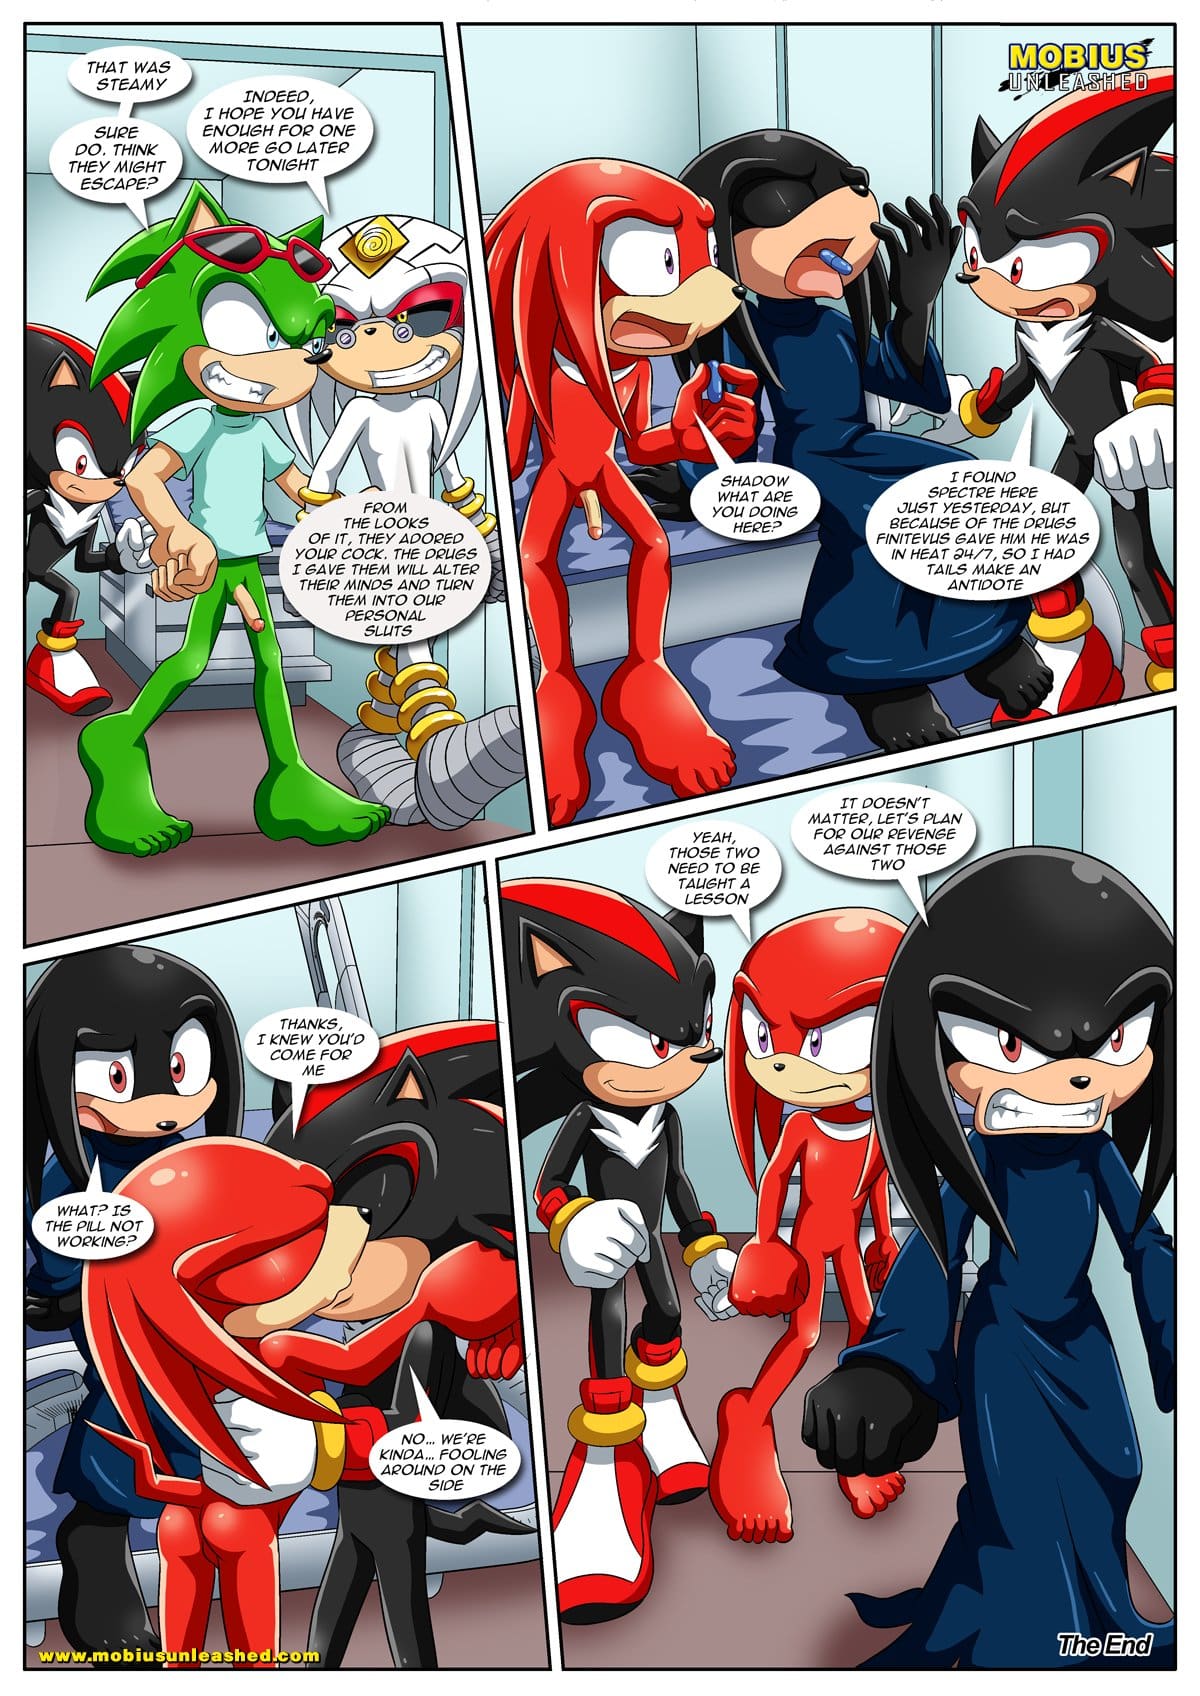 Doctor Cartoon Porn Comics - The Doctor Will See You Now 2 Porn Comics by [Palcomix] (Sonic The  Hedgehog) Rule 34 Comics â€“ R34Porn